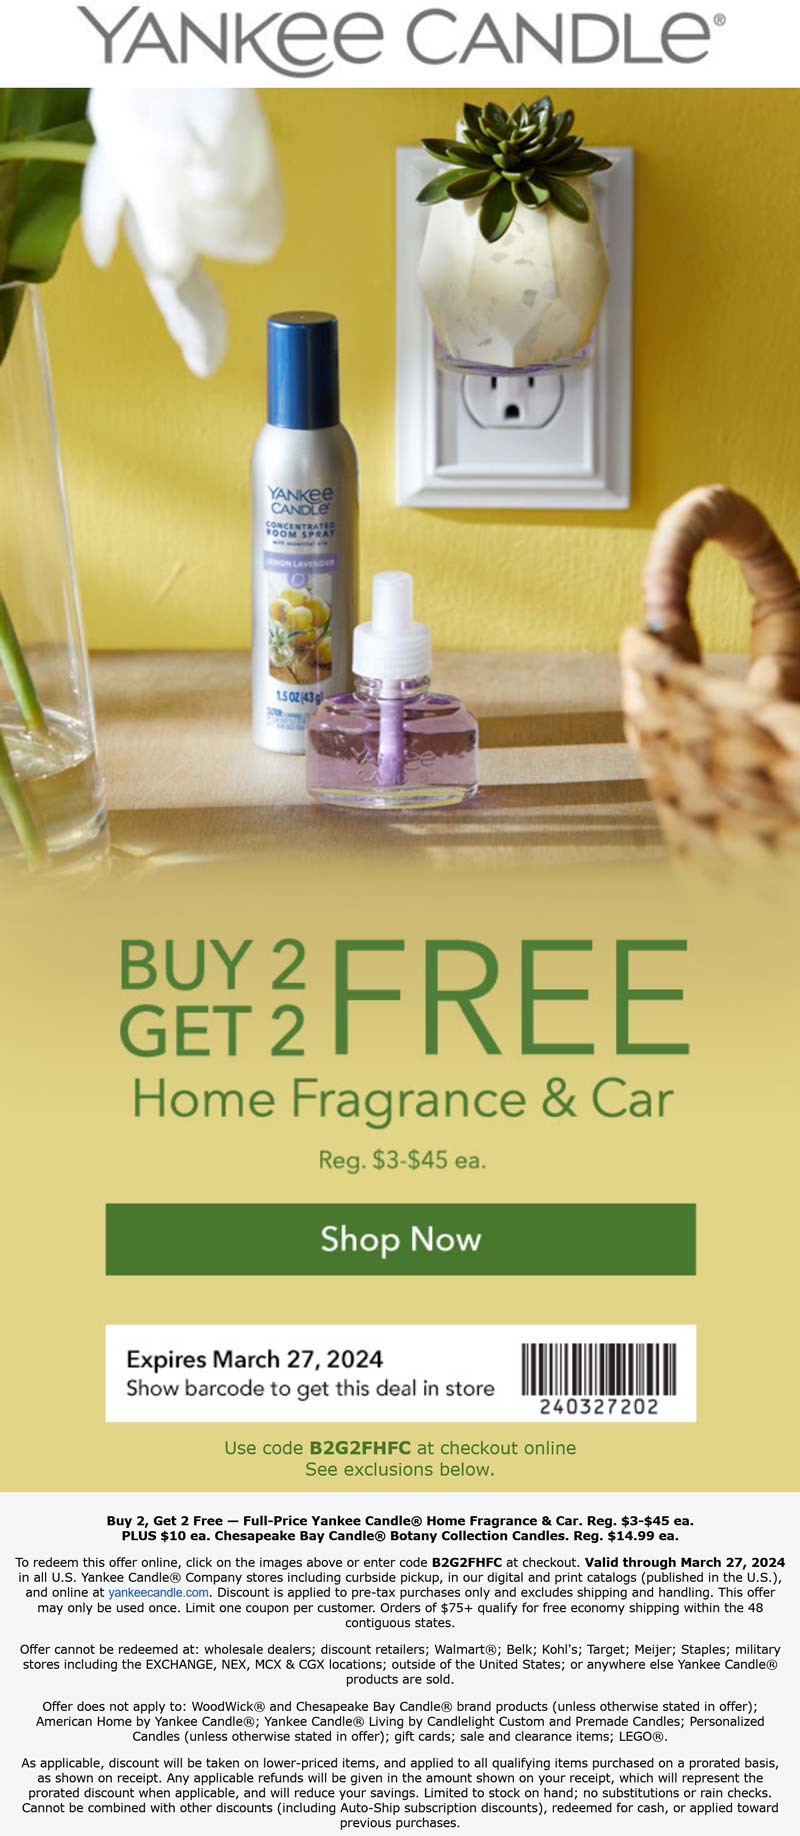 Yankee Candle stores Coupon  4-for-2 on home fragrance & car at Yankee Candle, or online via promo code B2G2FHFC #yankeecandle 